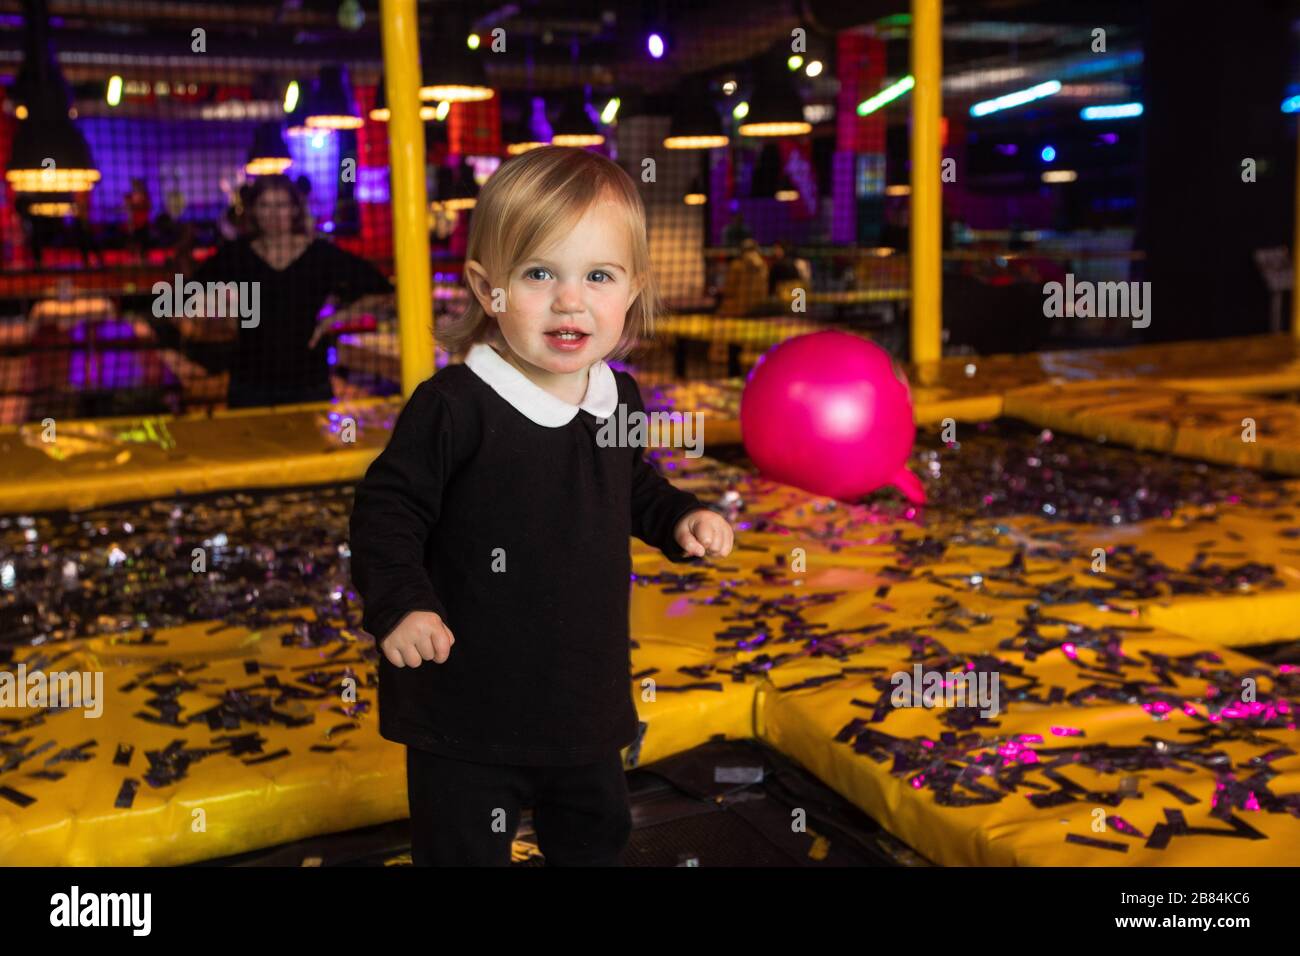 Cute girl playing on mats during party Stock Photo